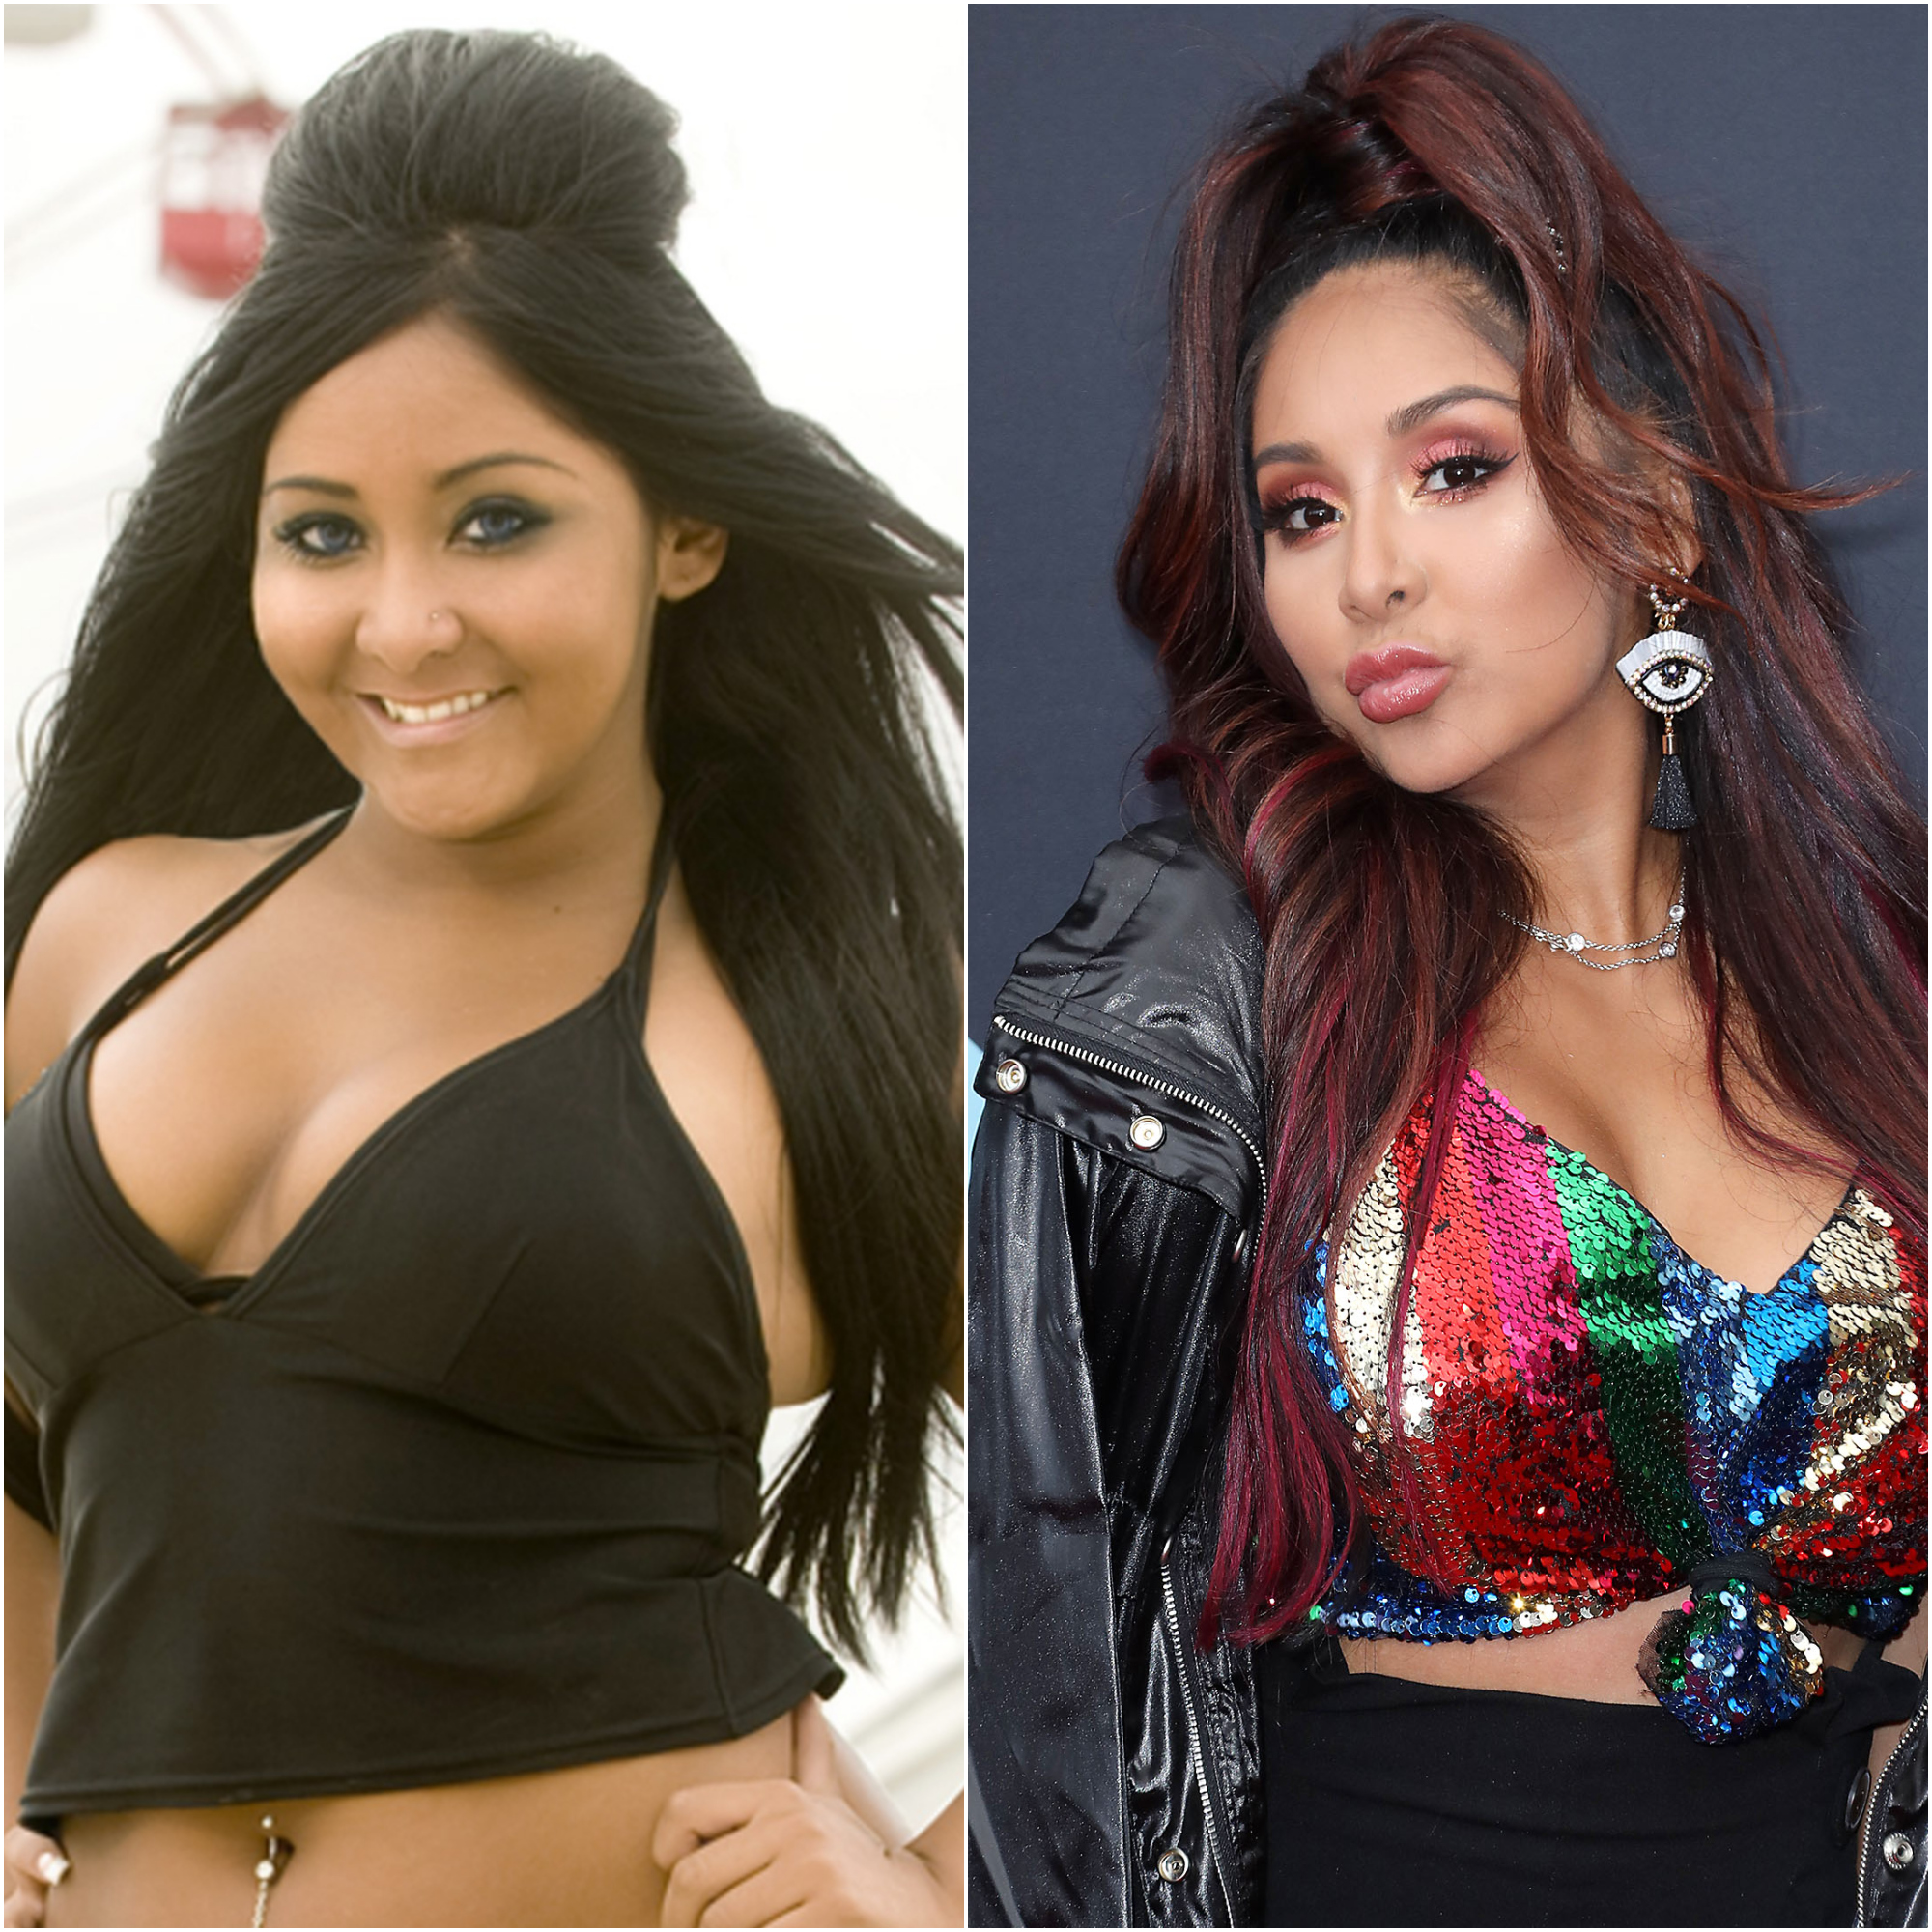 Nicole 'Snooki' Polizzi Explains All of Her Most Iconic 'Jersey Shore' Looks